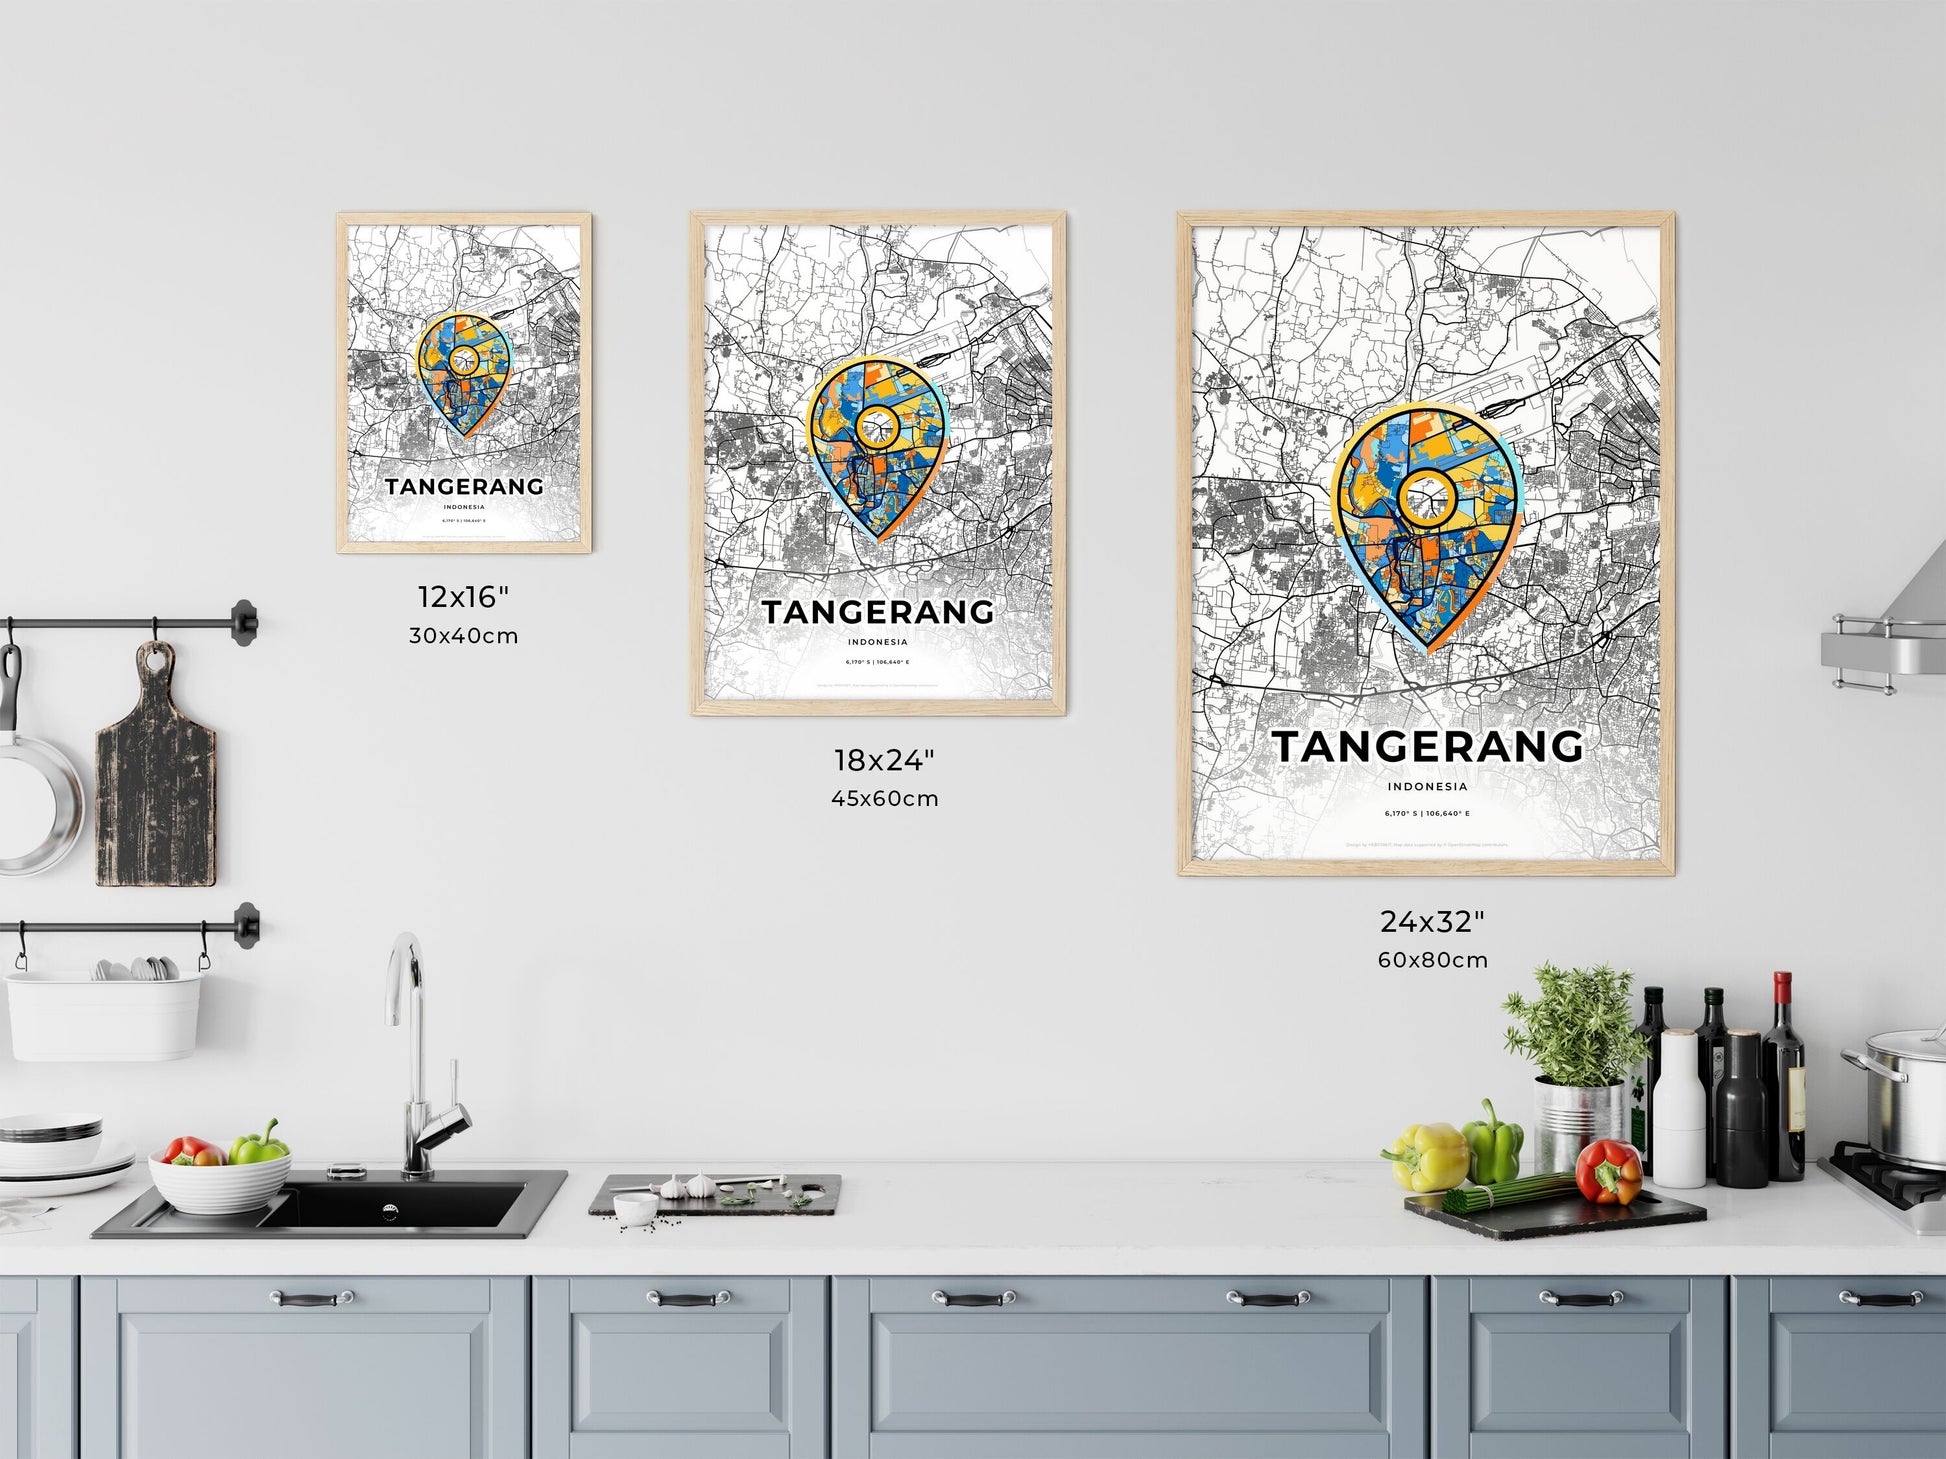 TANGERANG INDONESIA minimal art map with a colorful icon.